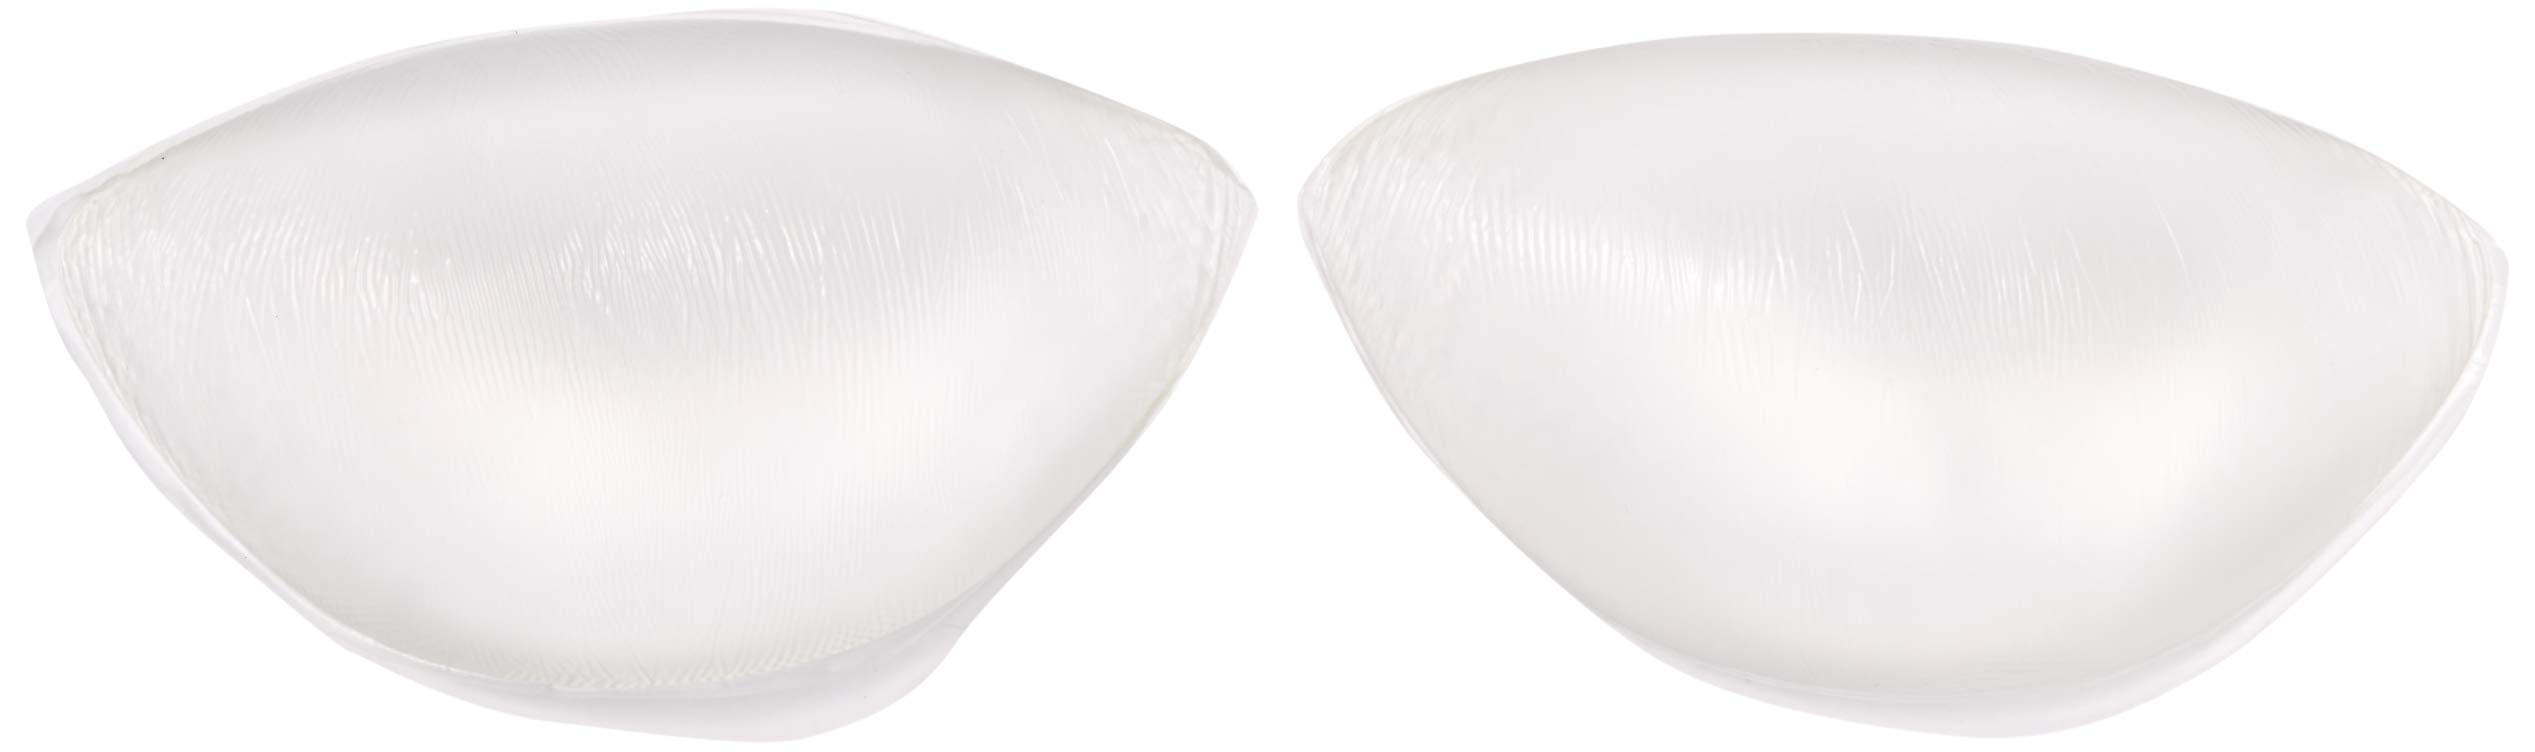 Maidenform Women's Silicone Push up Pads-Full Size-Half Moon Shape